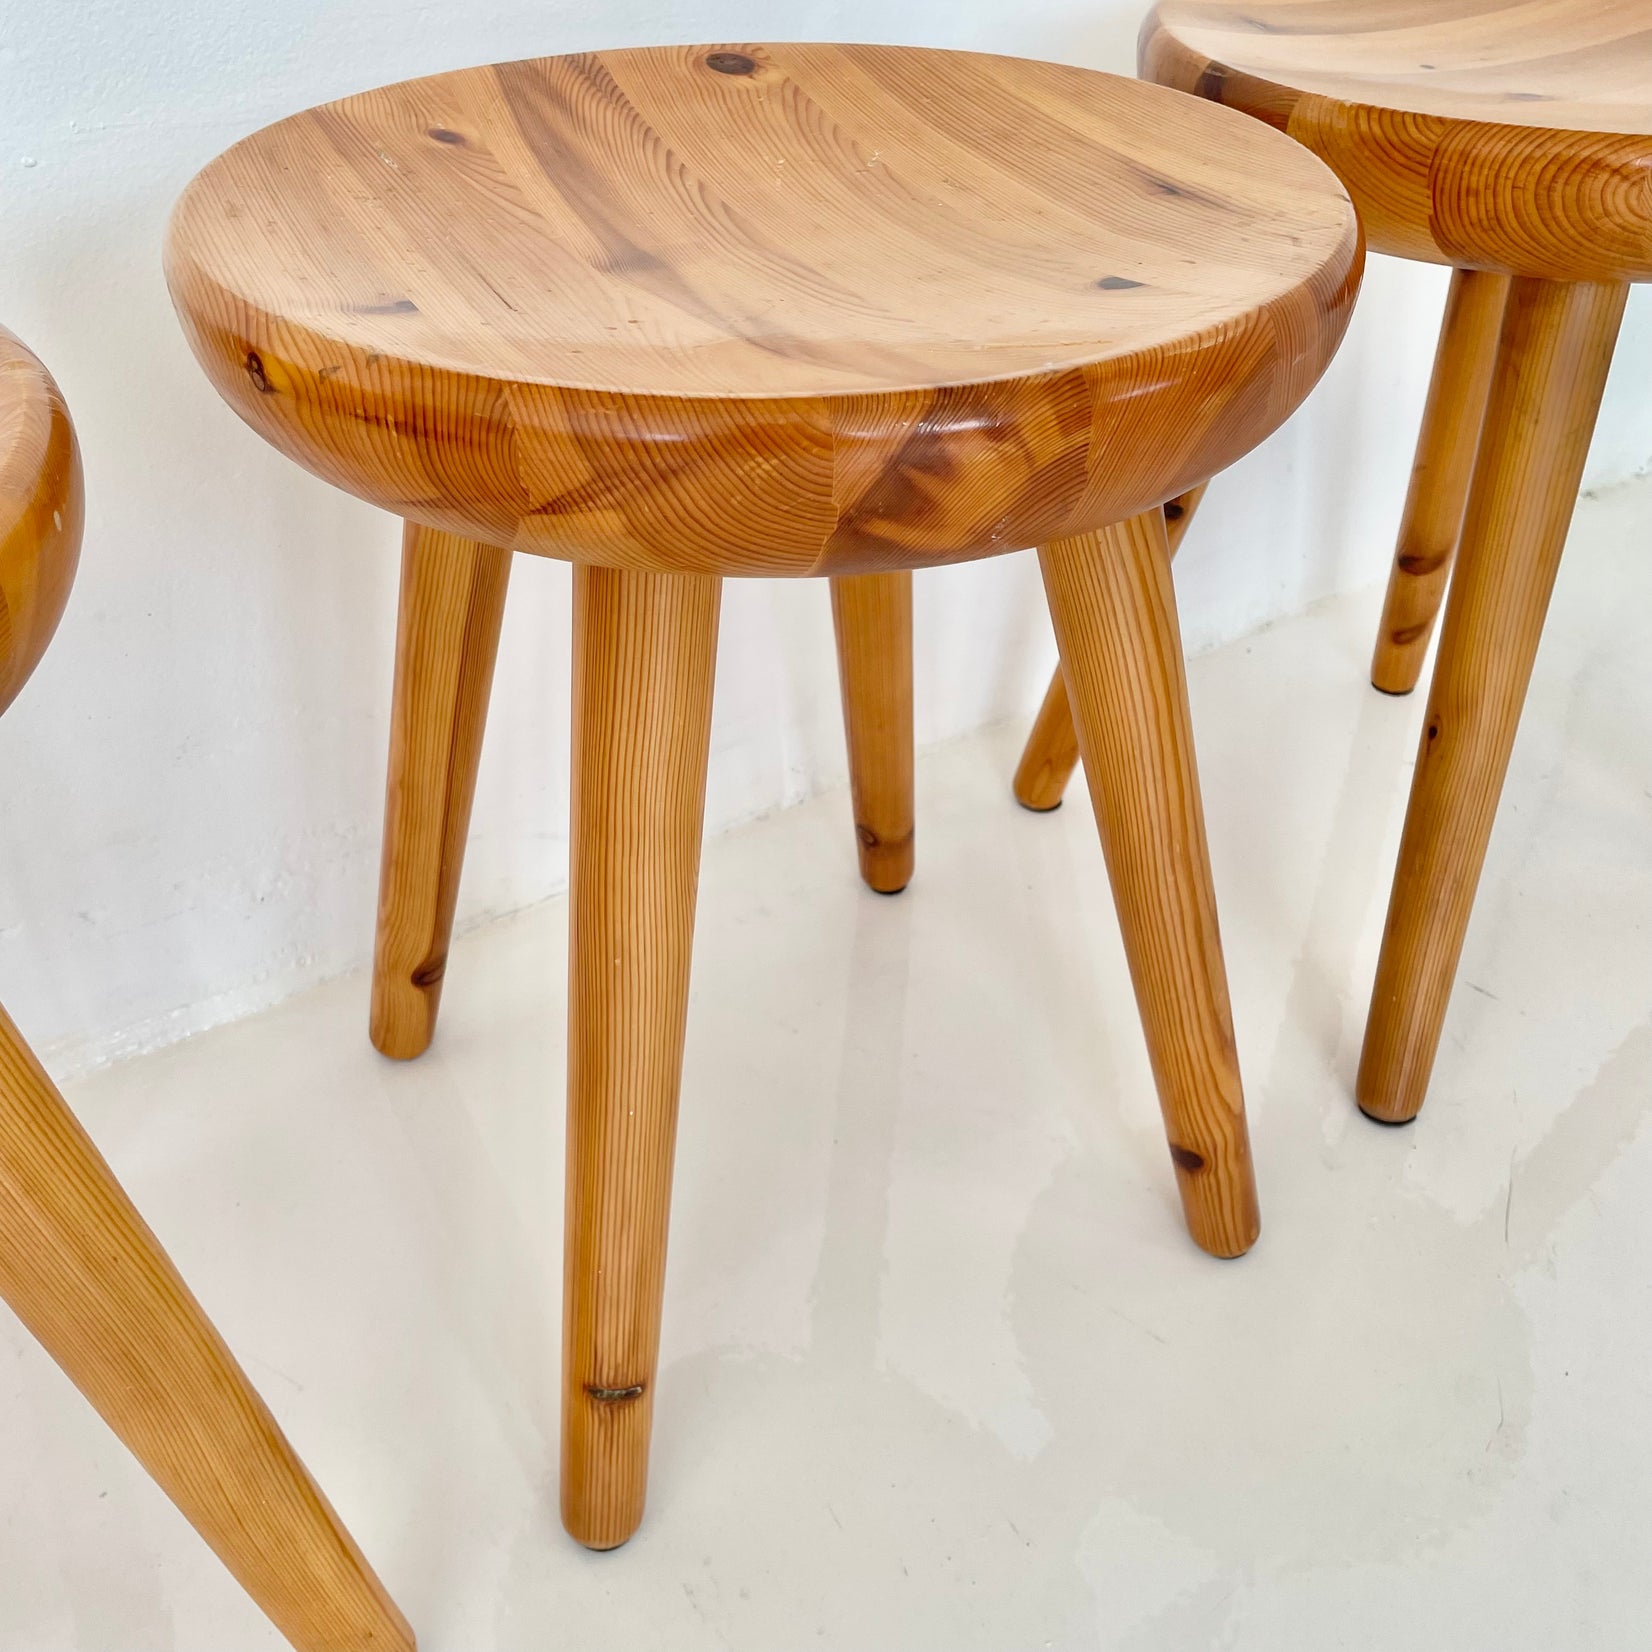 Charlotte Perriand Style Pine Stools